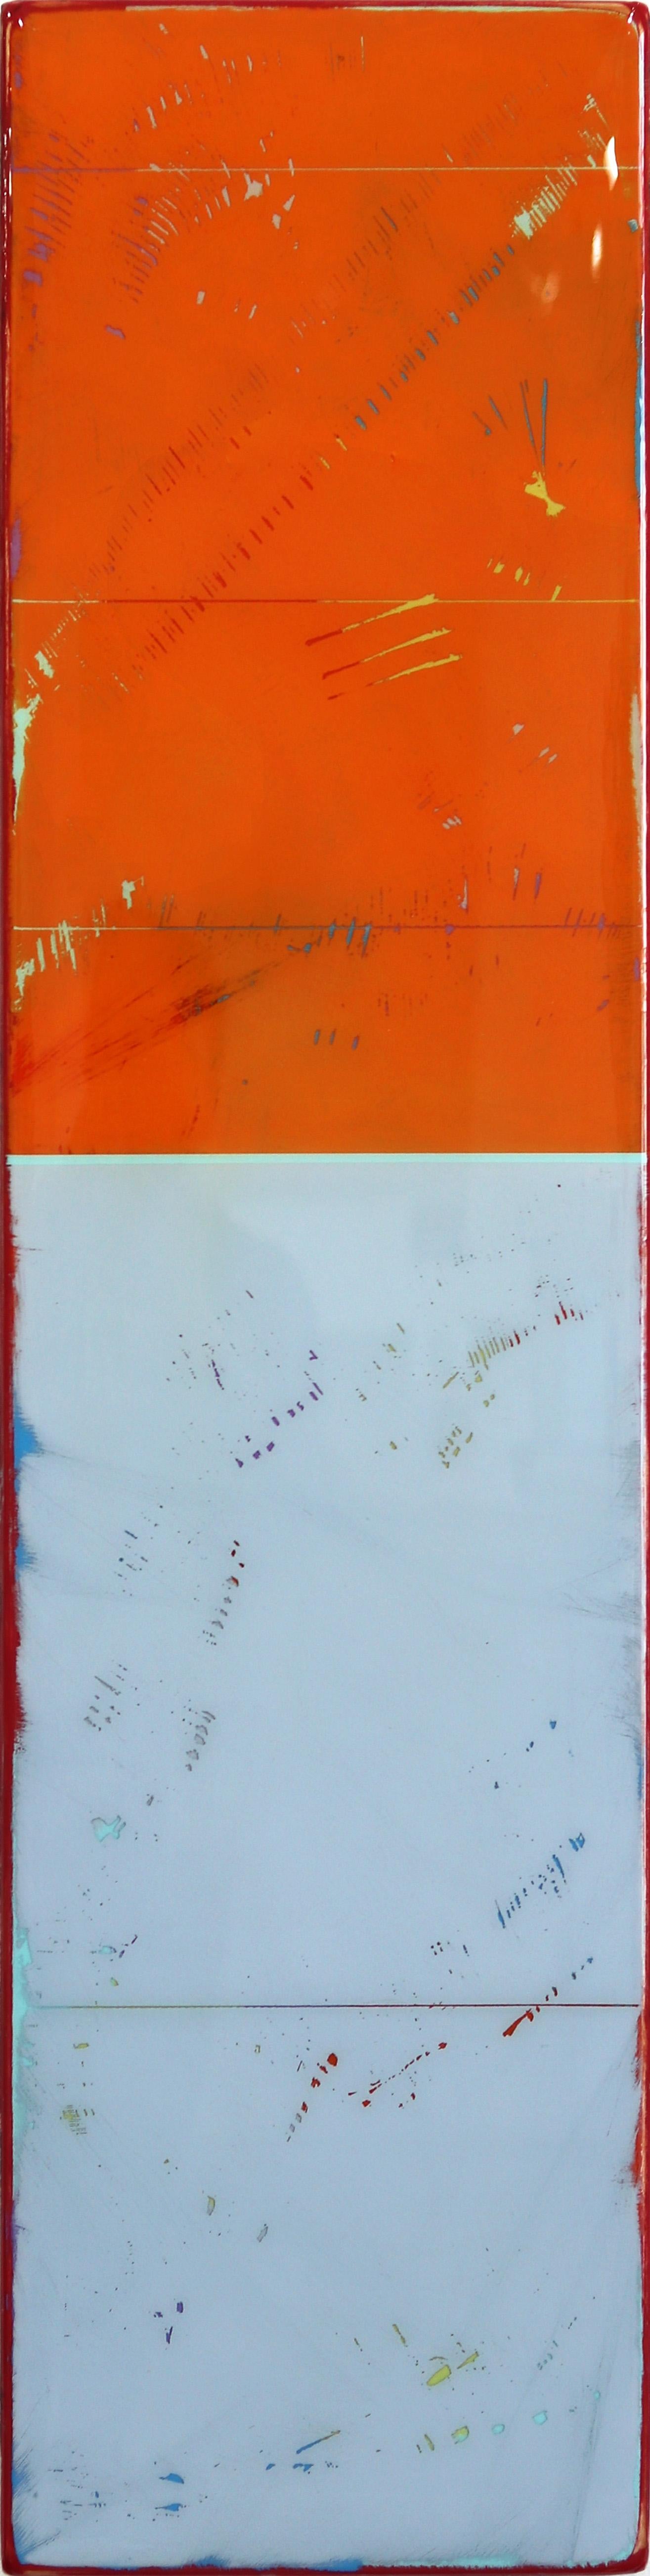 Ricky Hunt Abstract Painting - Sunspot 88 - Tall Modern Acrylic Two Tone Orange Resin Artwork